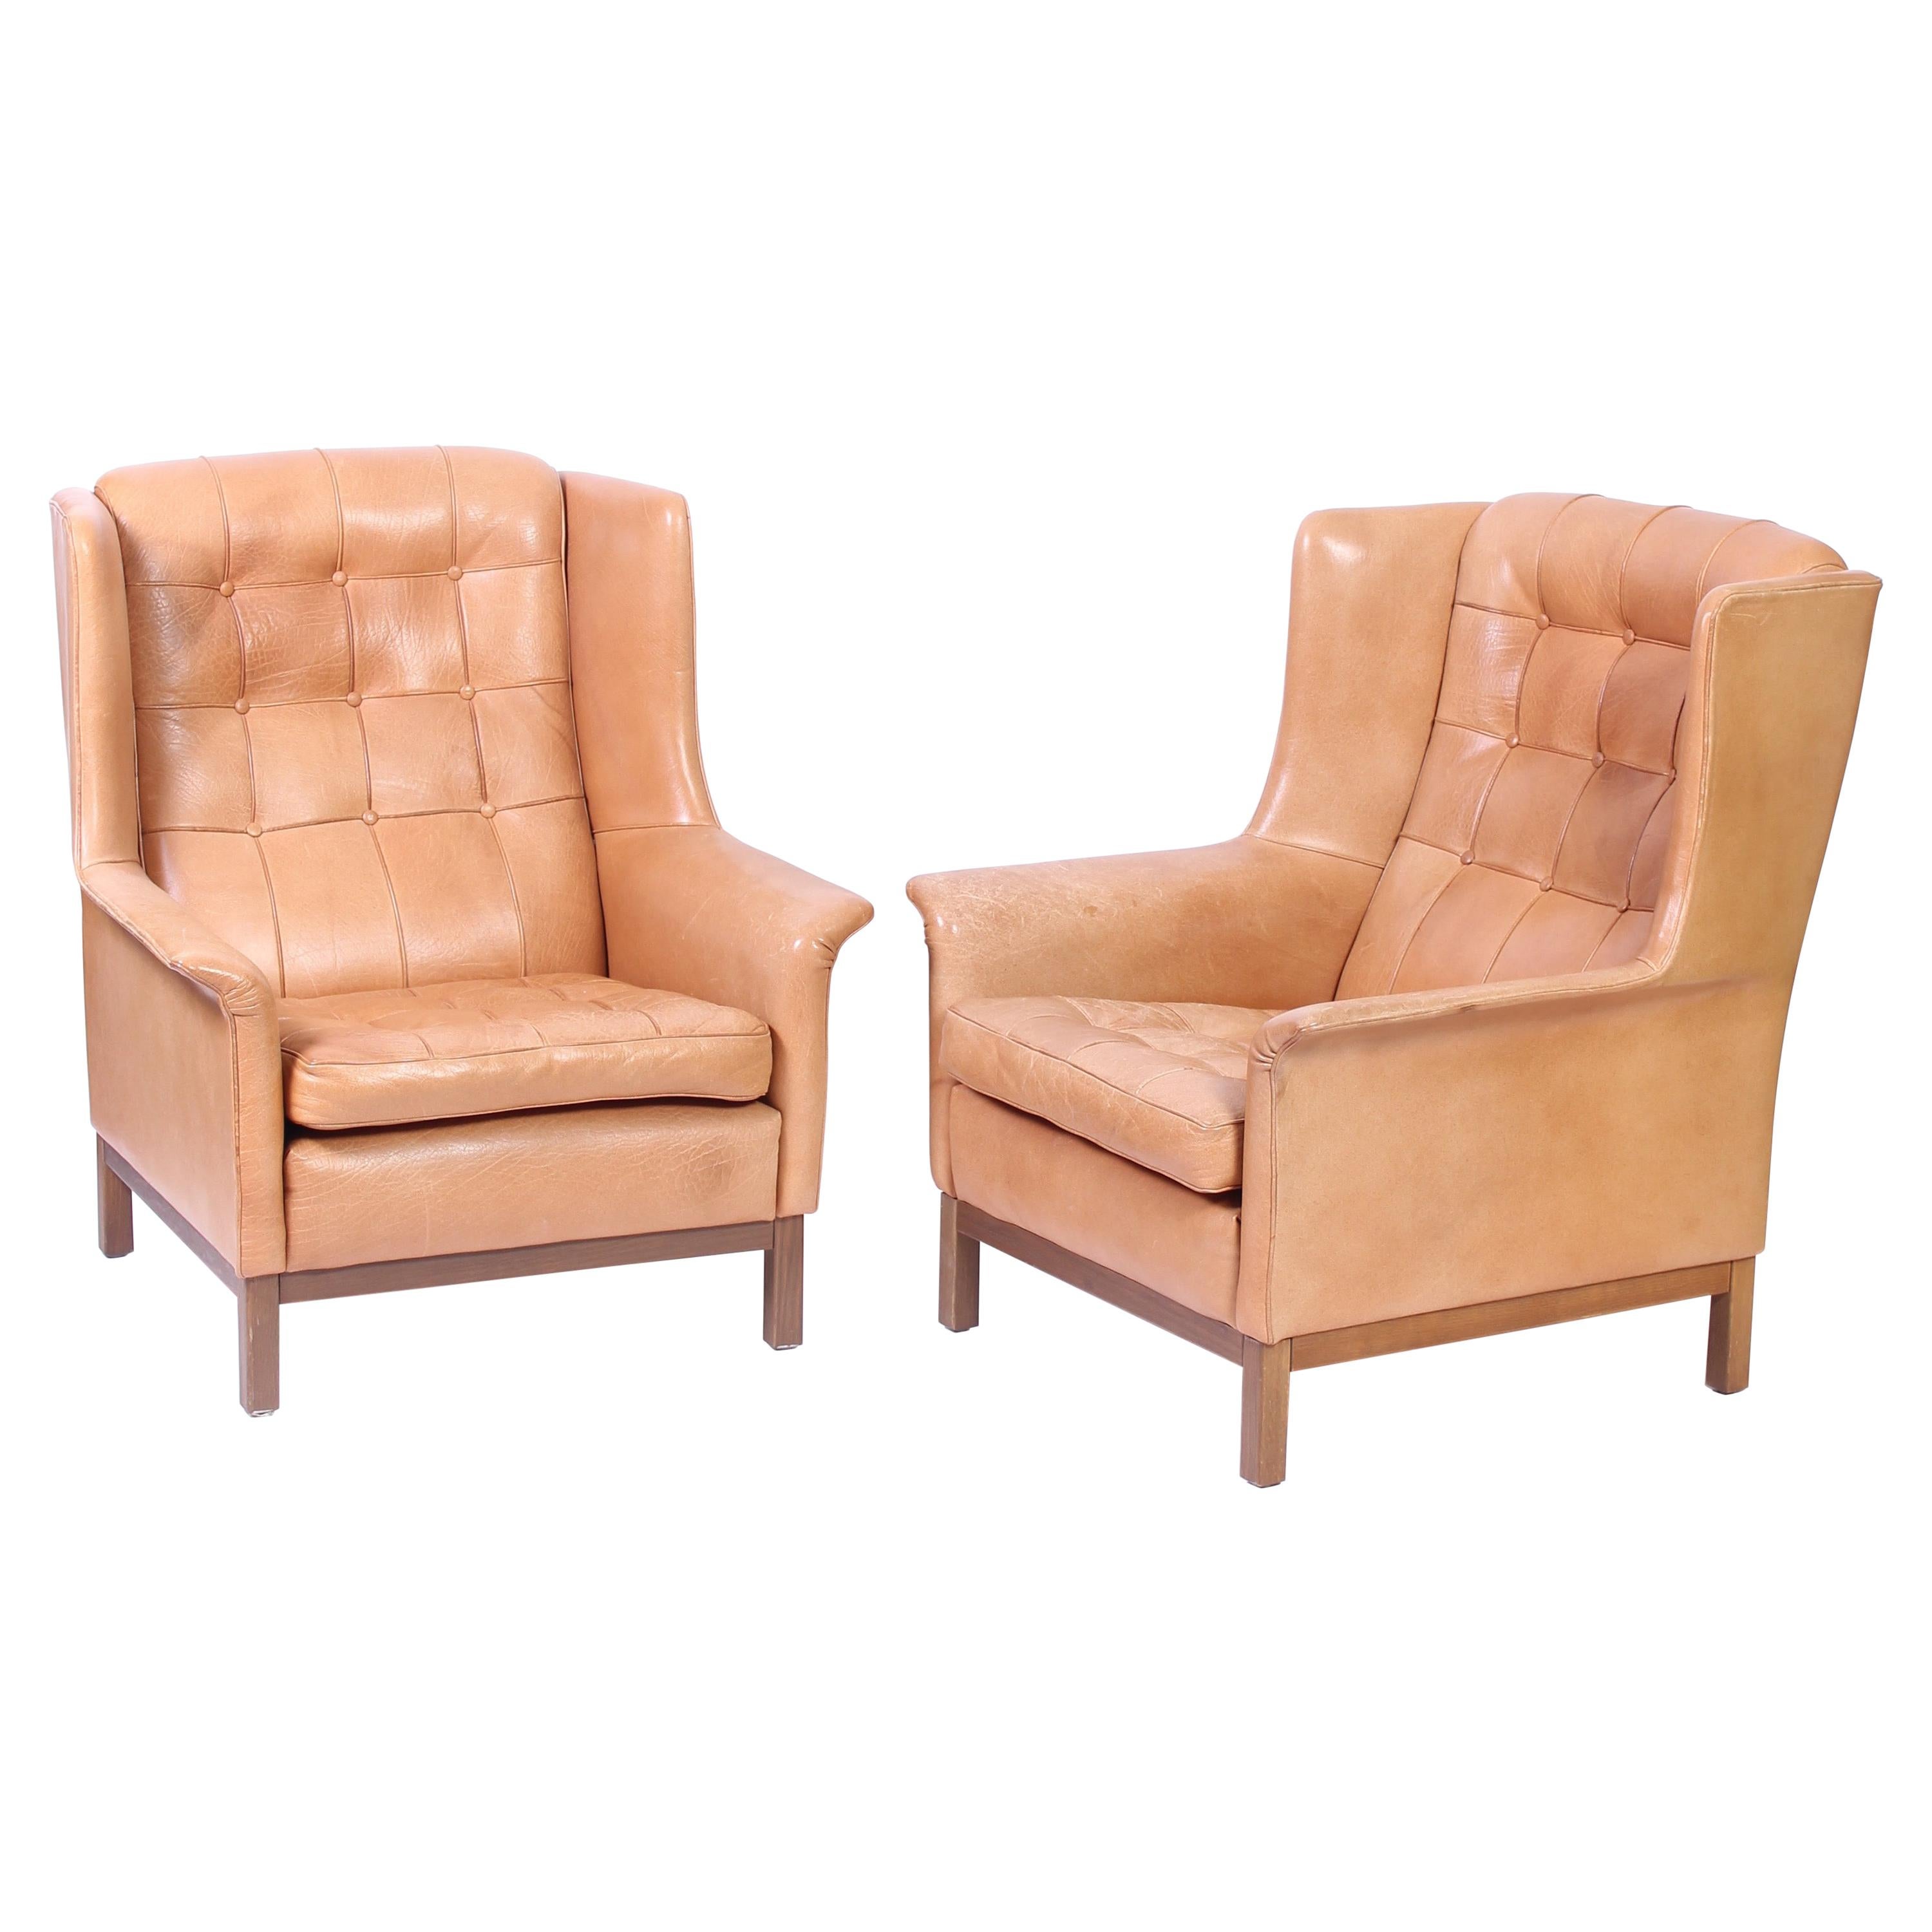 Pair of Midcentury Arne Norell Lounge Chairs with Ottoman, 1960s For Sale